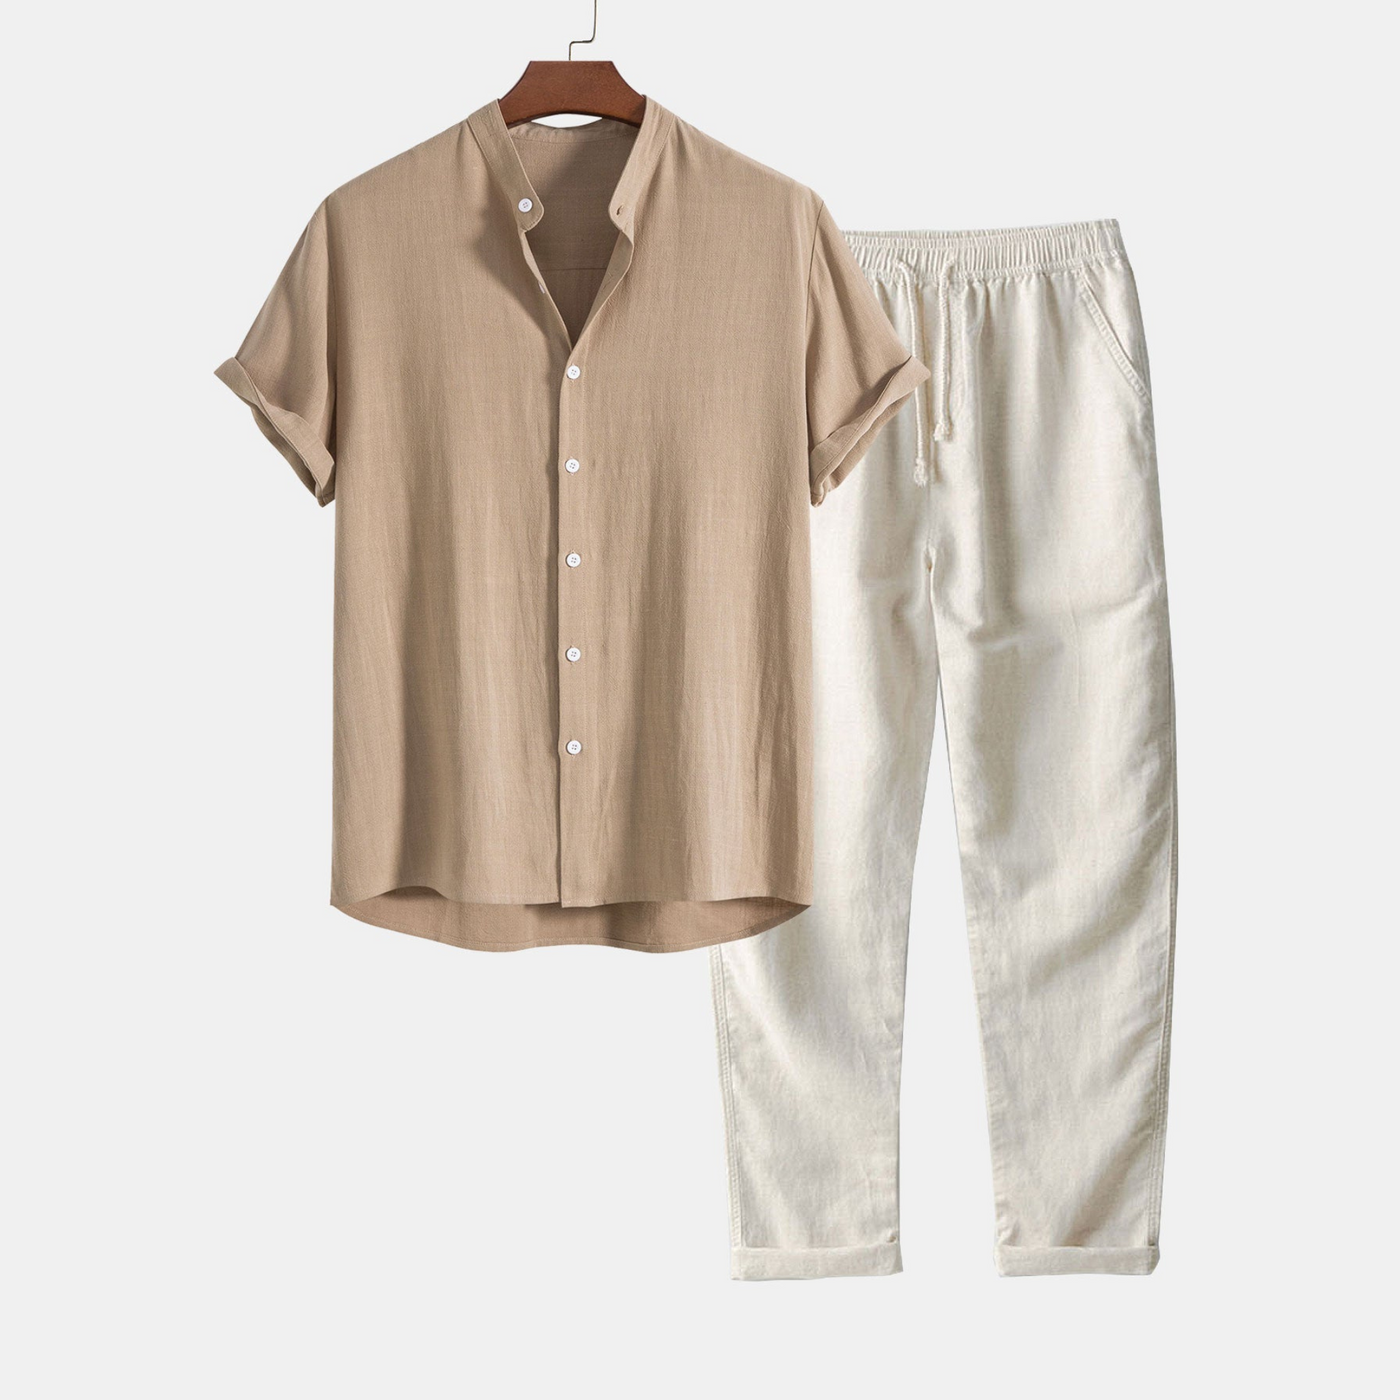 Crumpled Cotton Shirt with Half-Open Button Placket and Henley Collar, paired with Straight-Leg Linen Trousers.